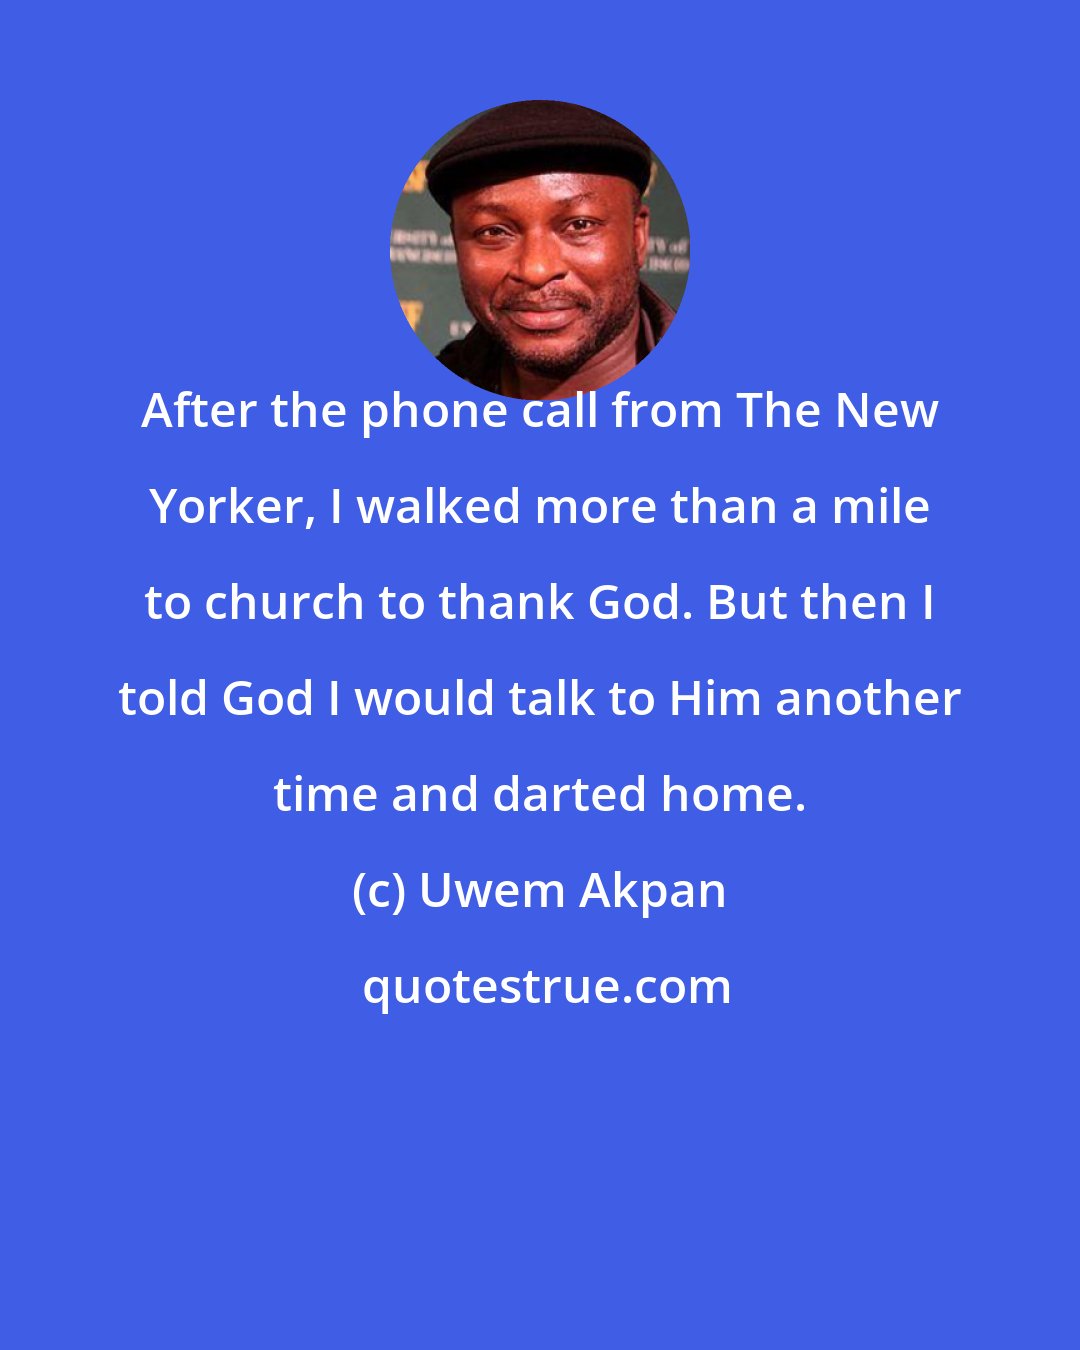 Uwem Akpan: After the phone call from The New Yorker, I walked more than a mile to church to thank God. But then I told God I would talk to Him another time and darted home.